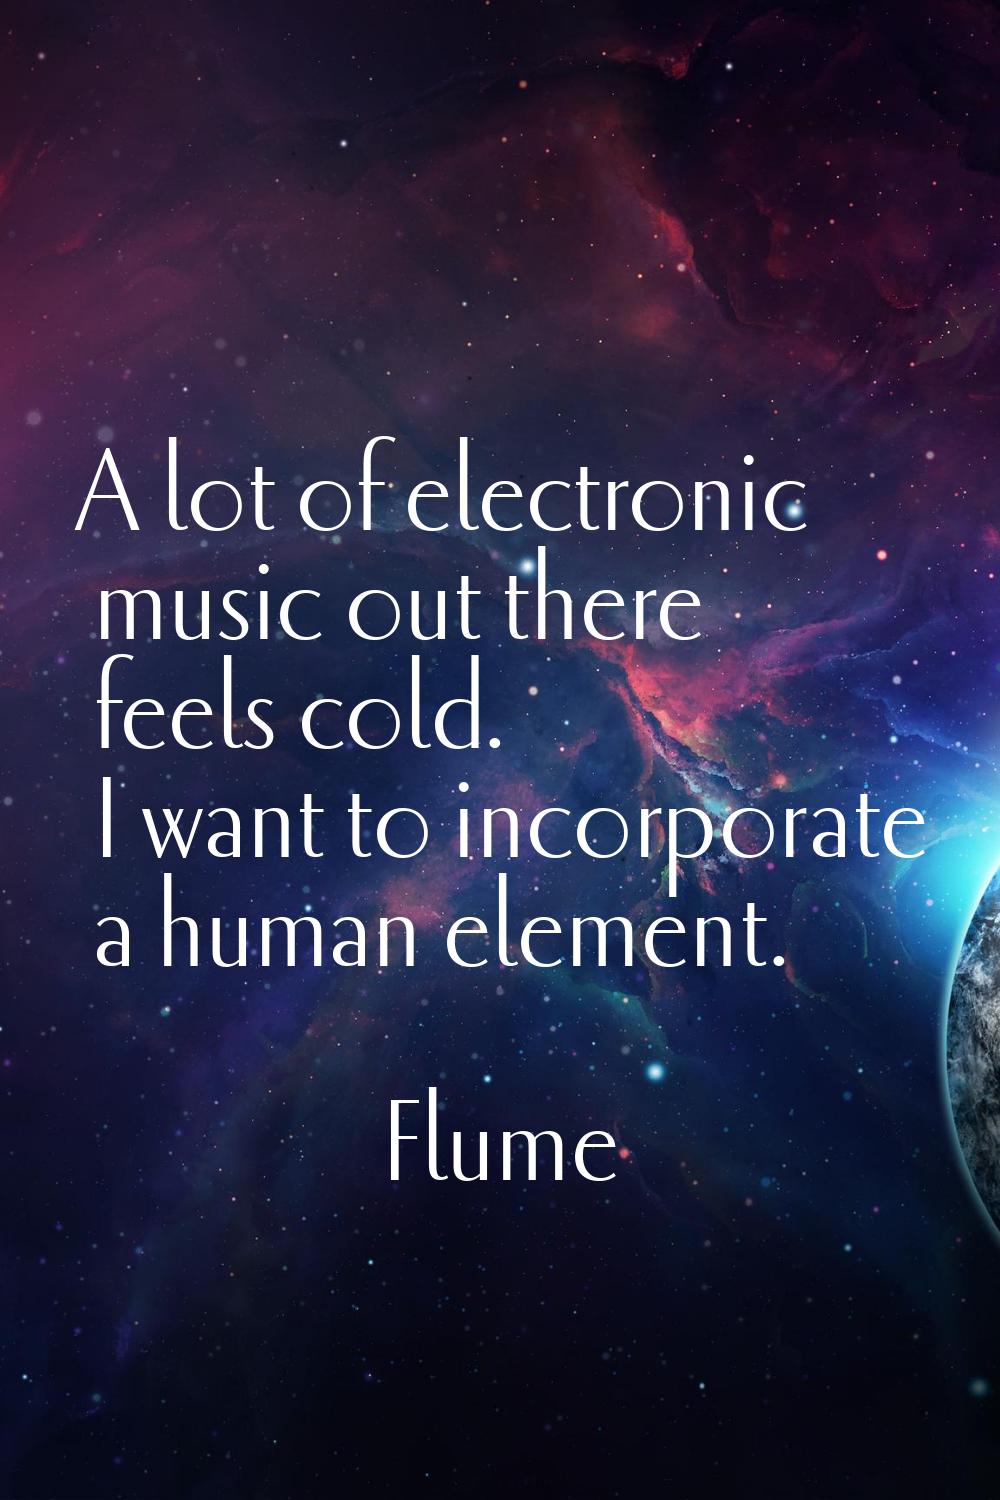 A lot of electronic music out there feels cold. I want to incorporate a human element.